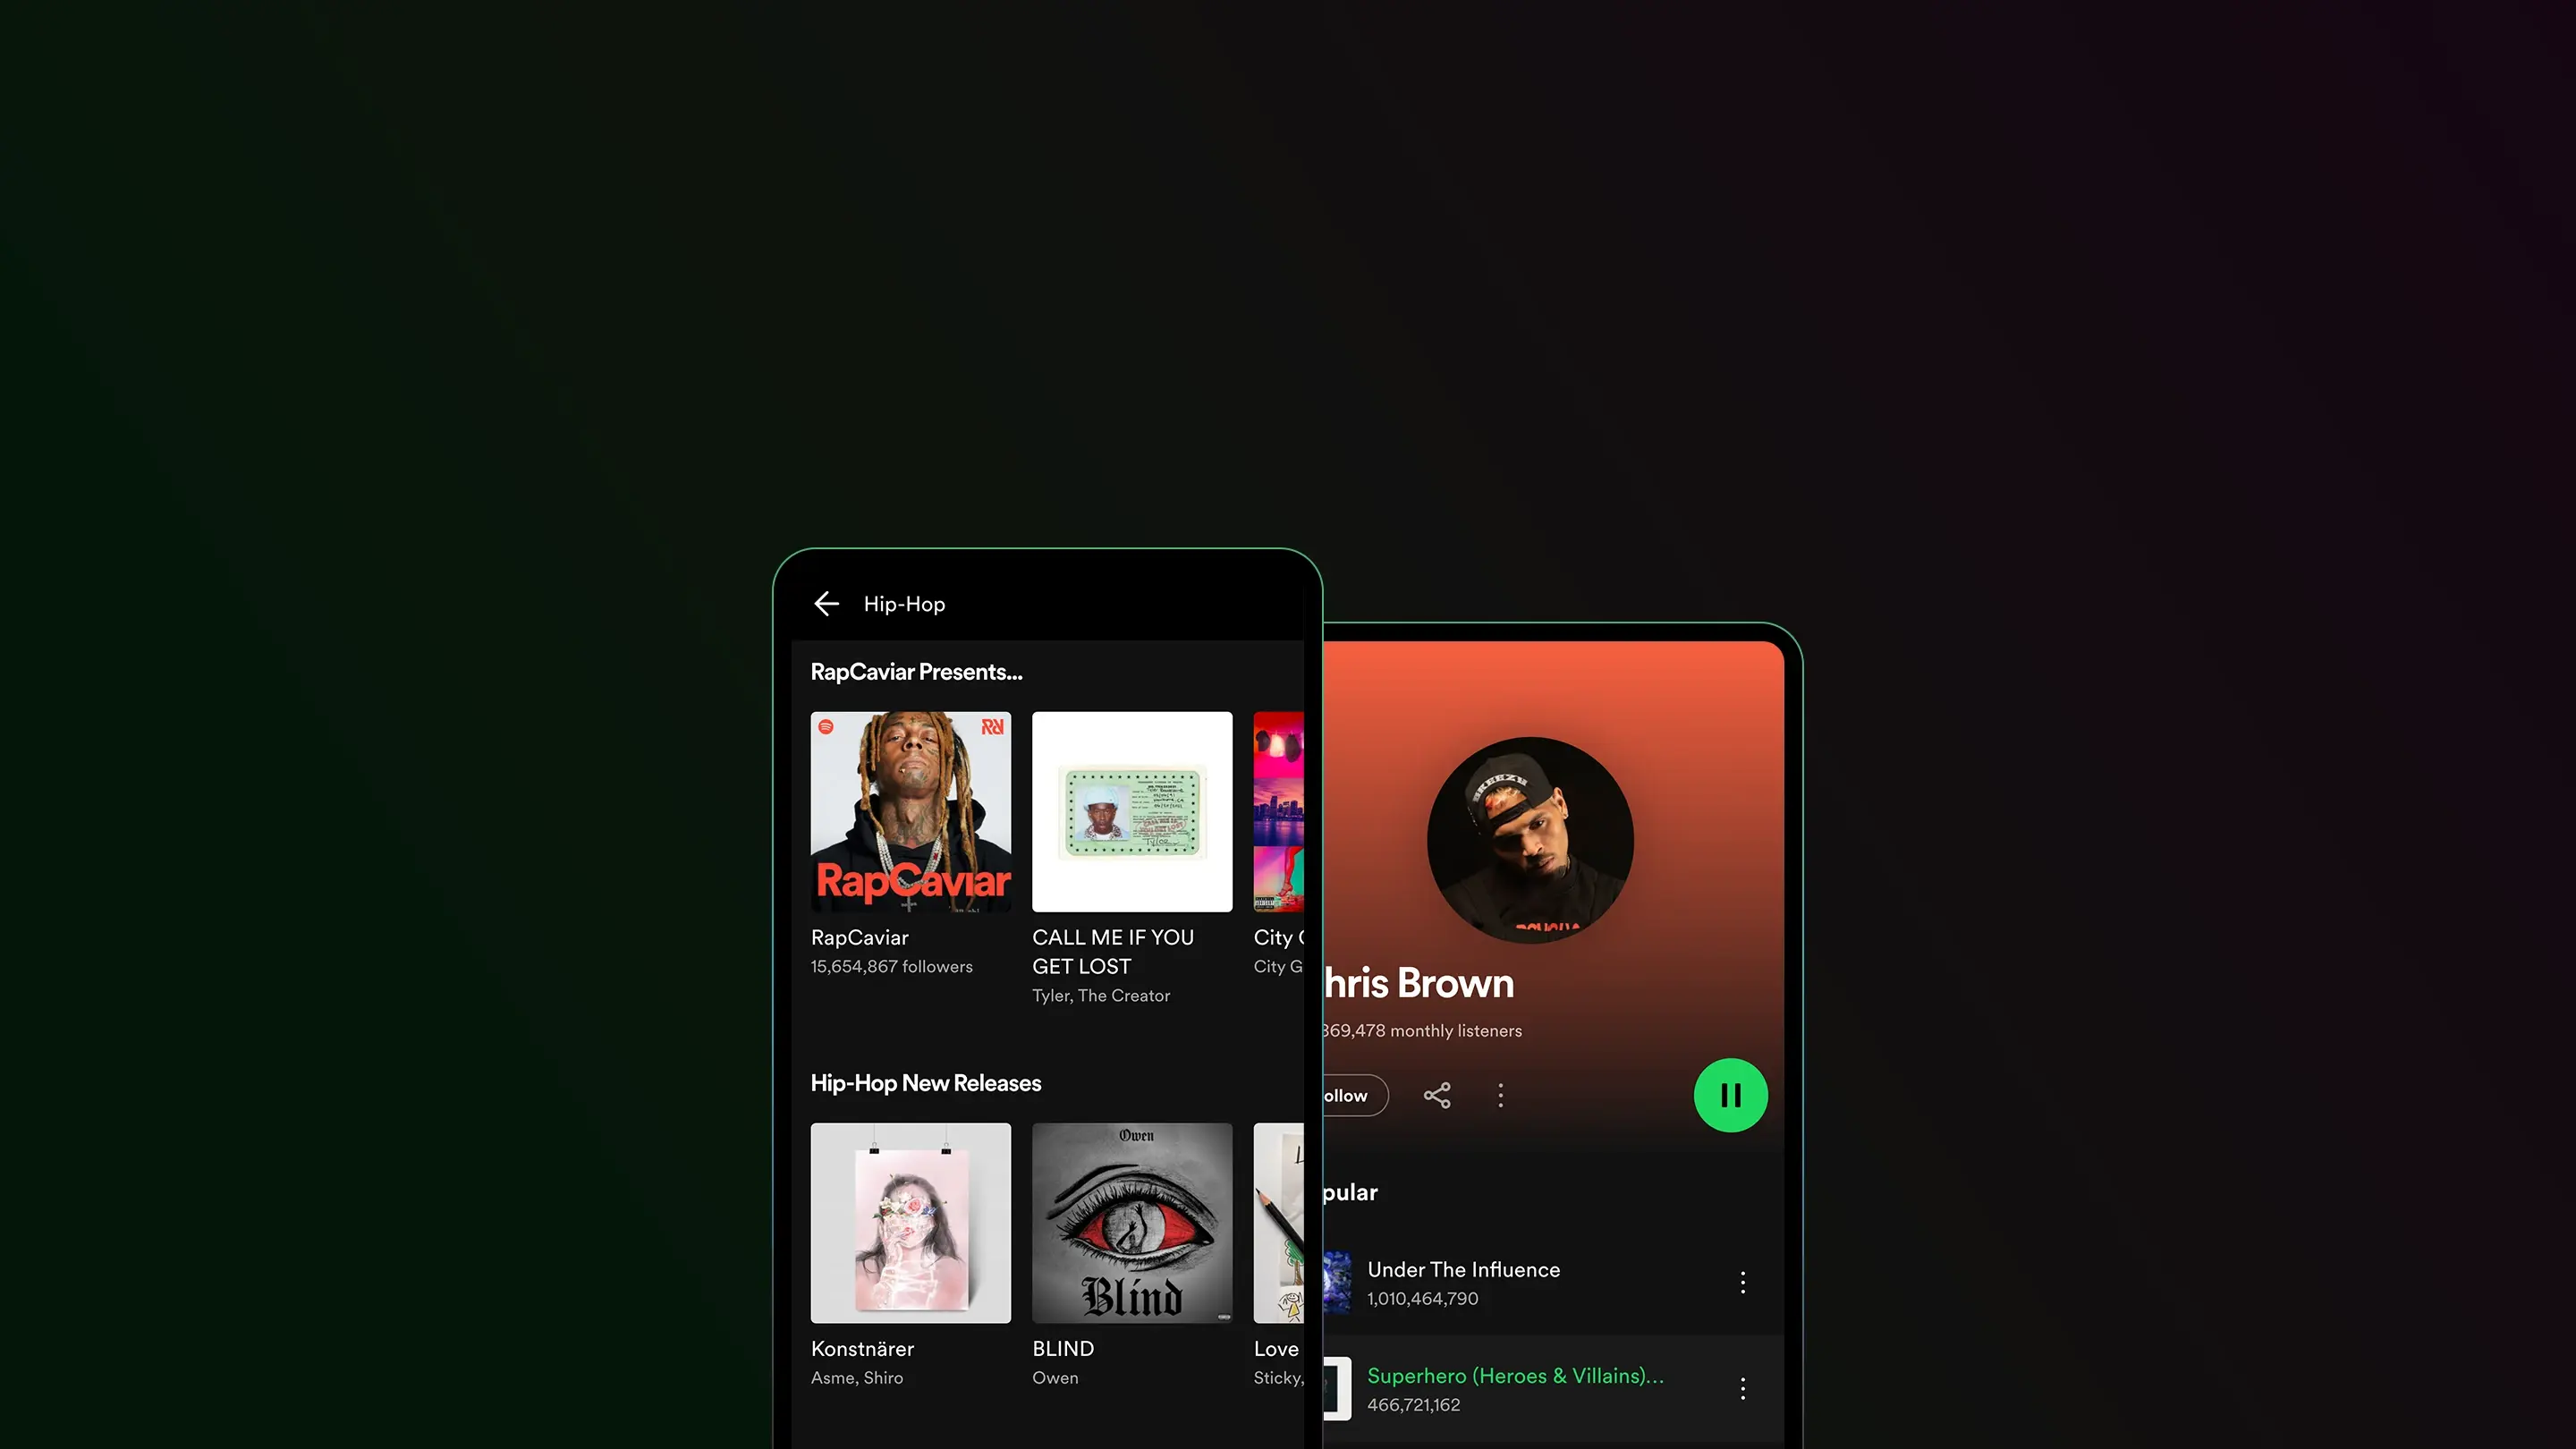 Spotify Listen without limits, a new personalized experience